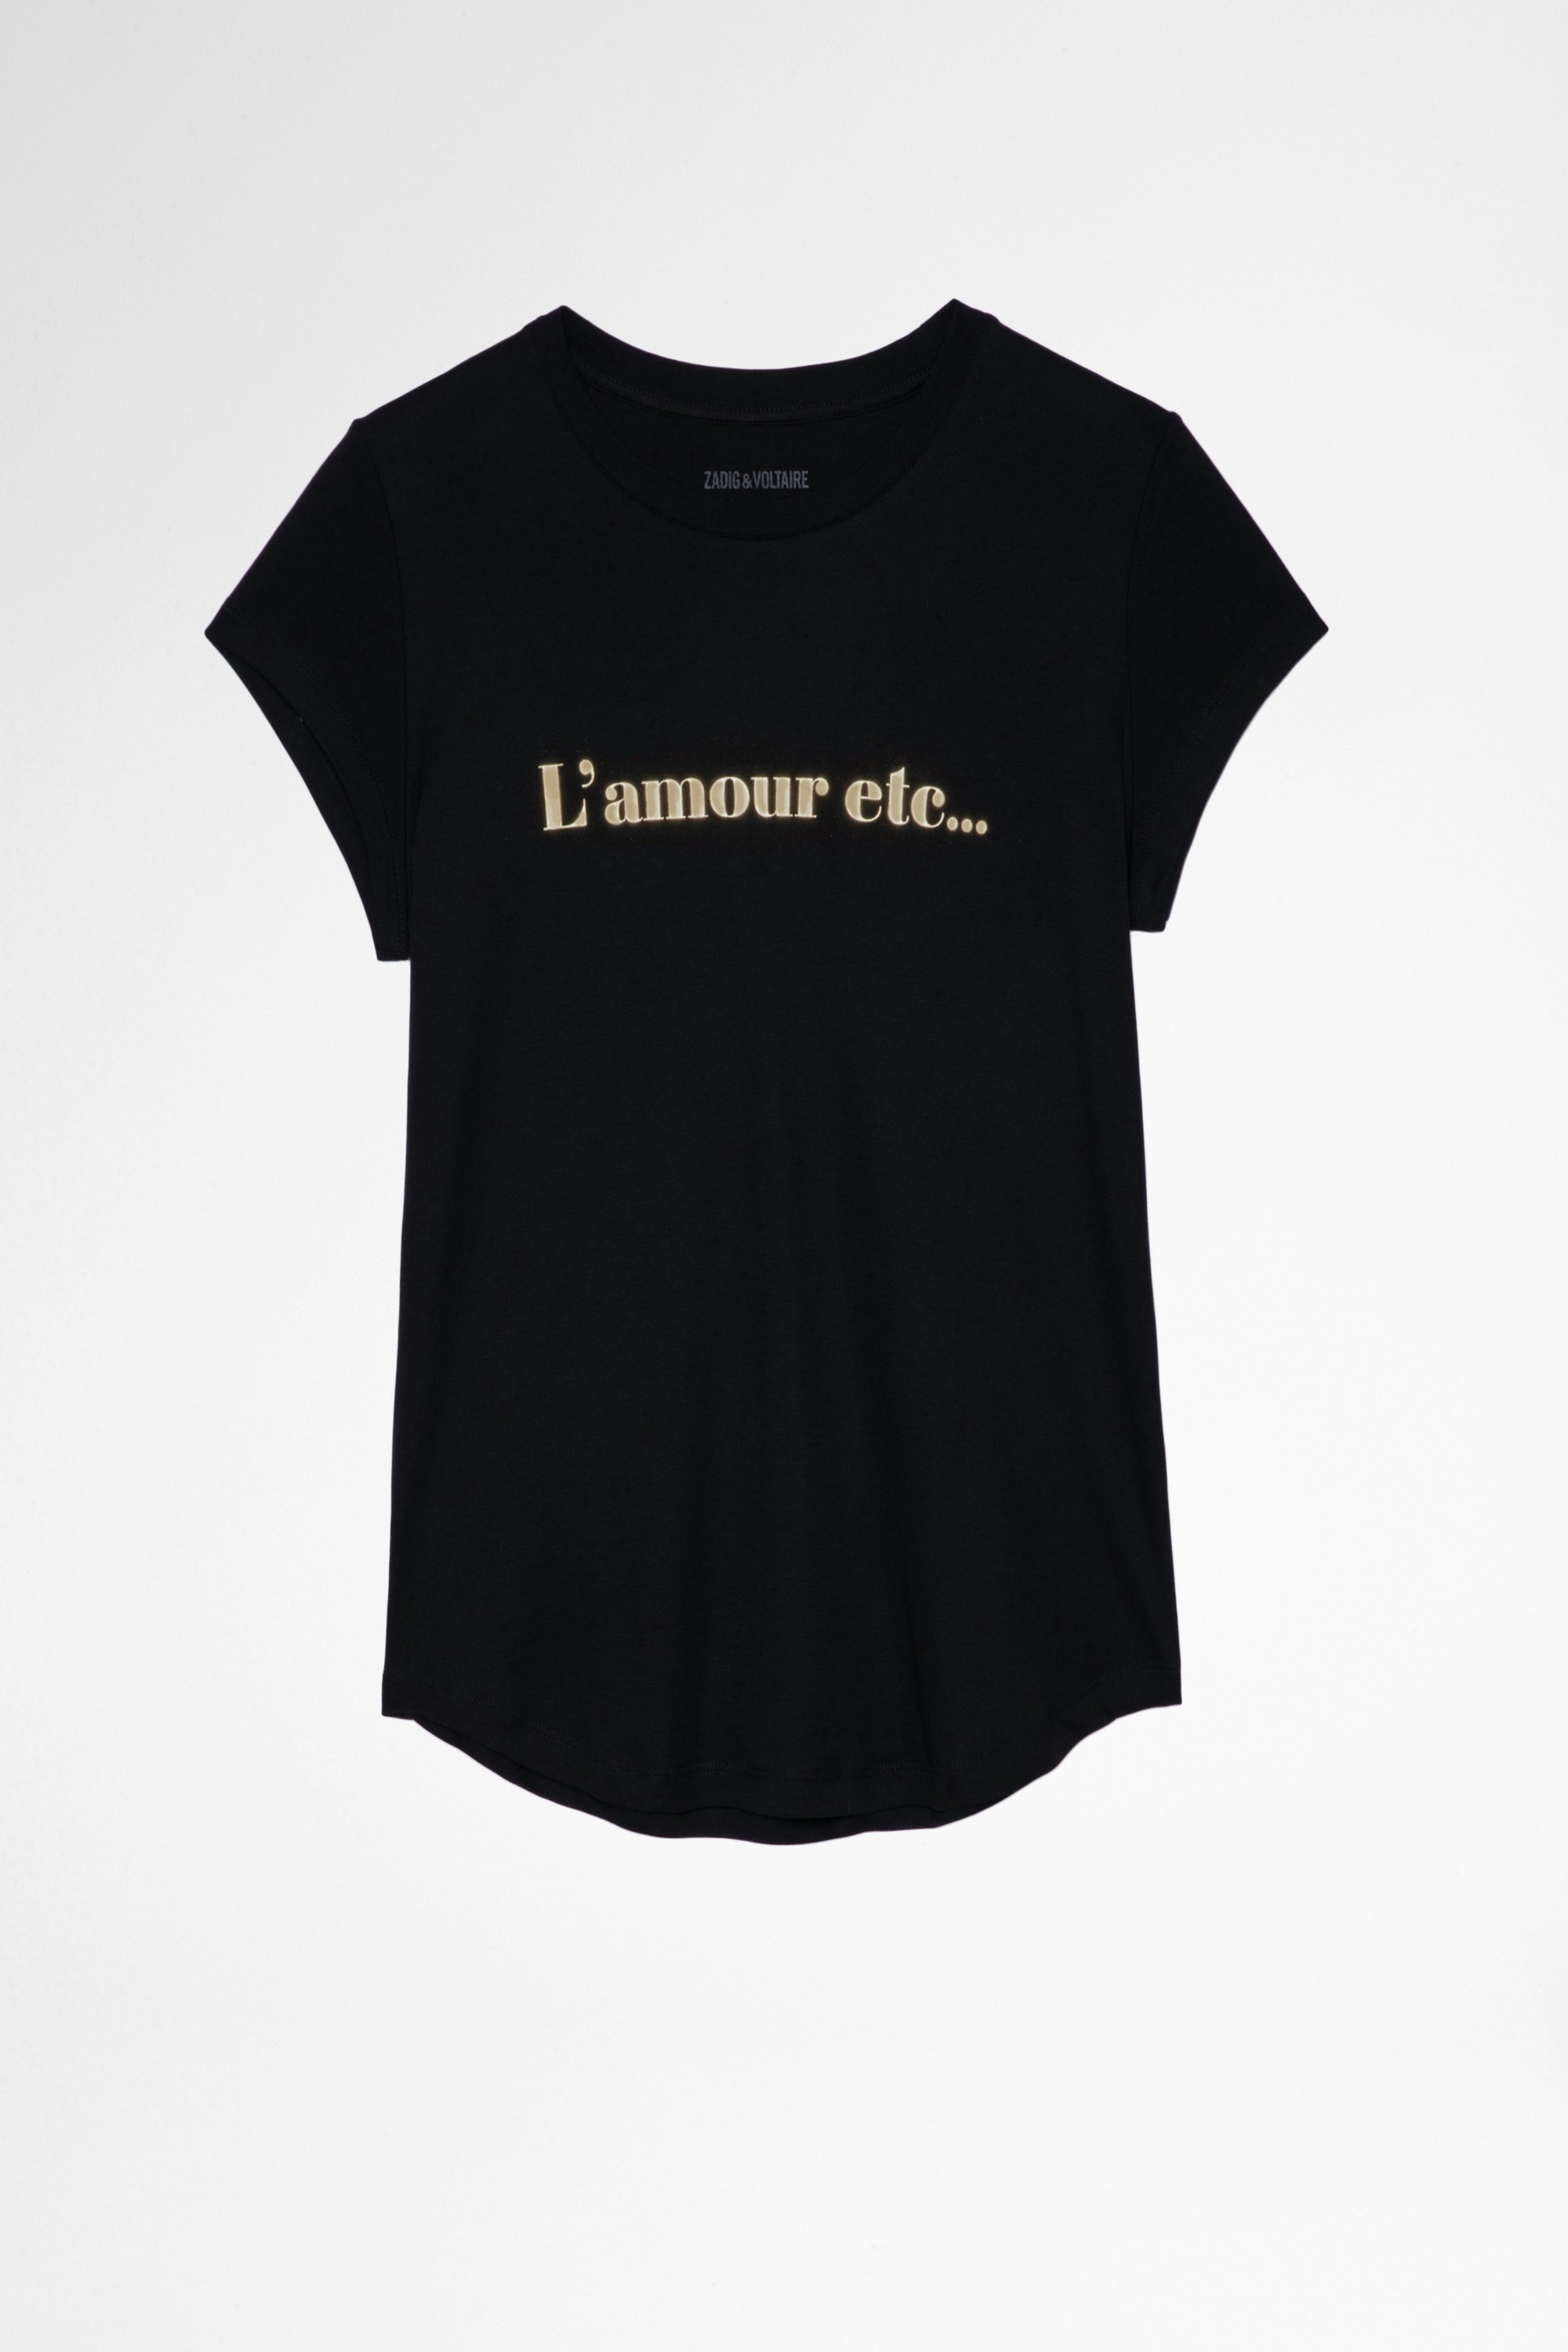 Woop L'amour etc Ｔシャツ Women's white cotton t-shirt with Love etc print. Made with fibers from organic farming.